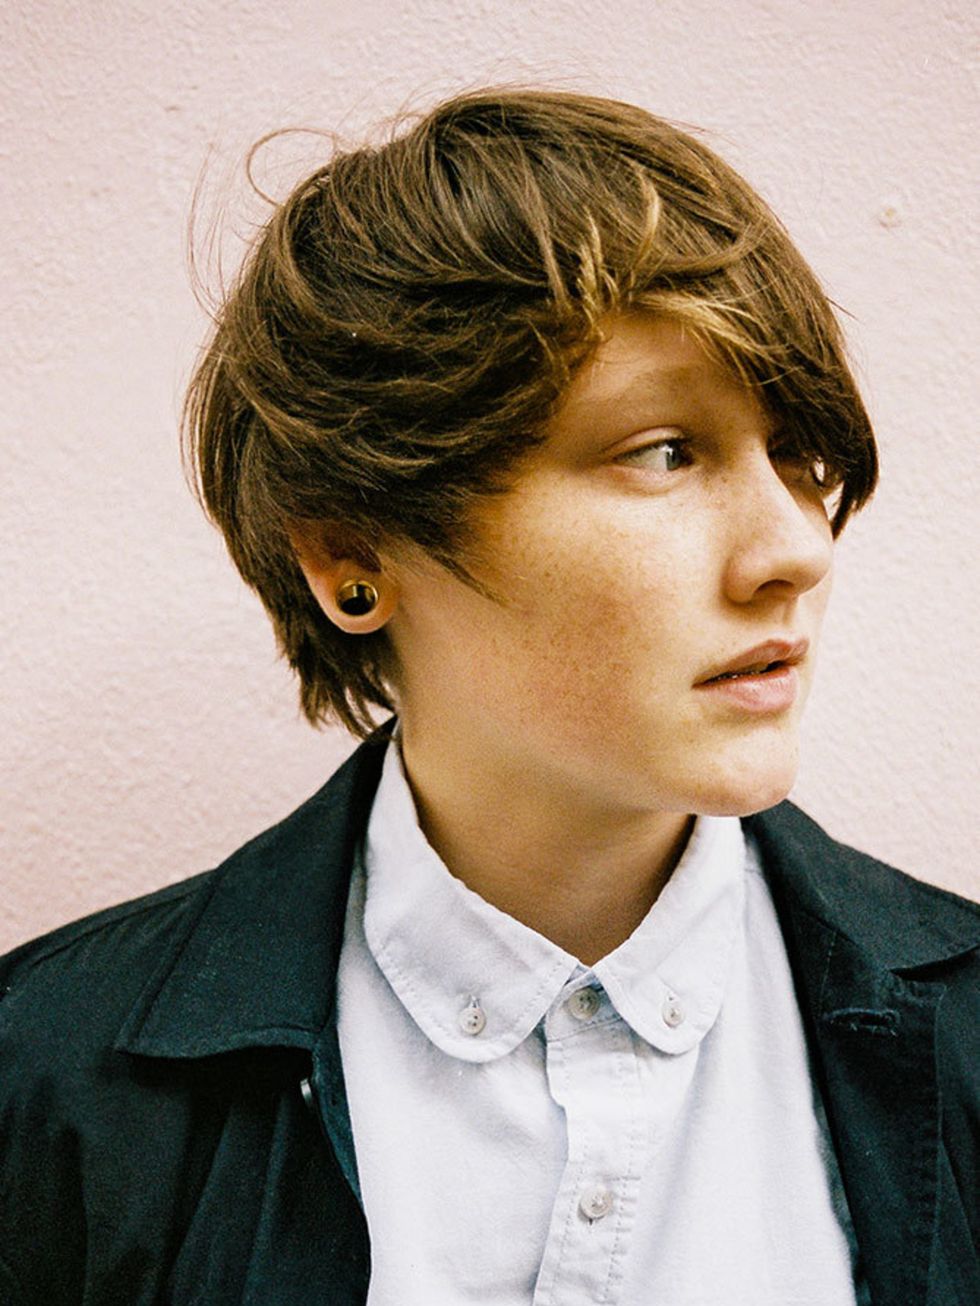 <p>Soak, 19, <span style="line-height:1.6">Singer-songwriter</span></p>

<p><span style="line-height:1.6">Bridie Monds-Watson started performing her music when she was 14  the same year she came out to her parents. Shortly after, she played at Radio 1s 